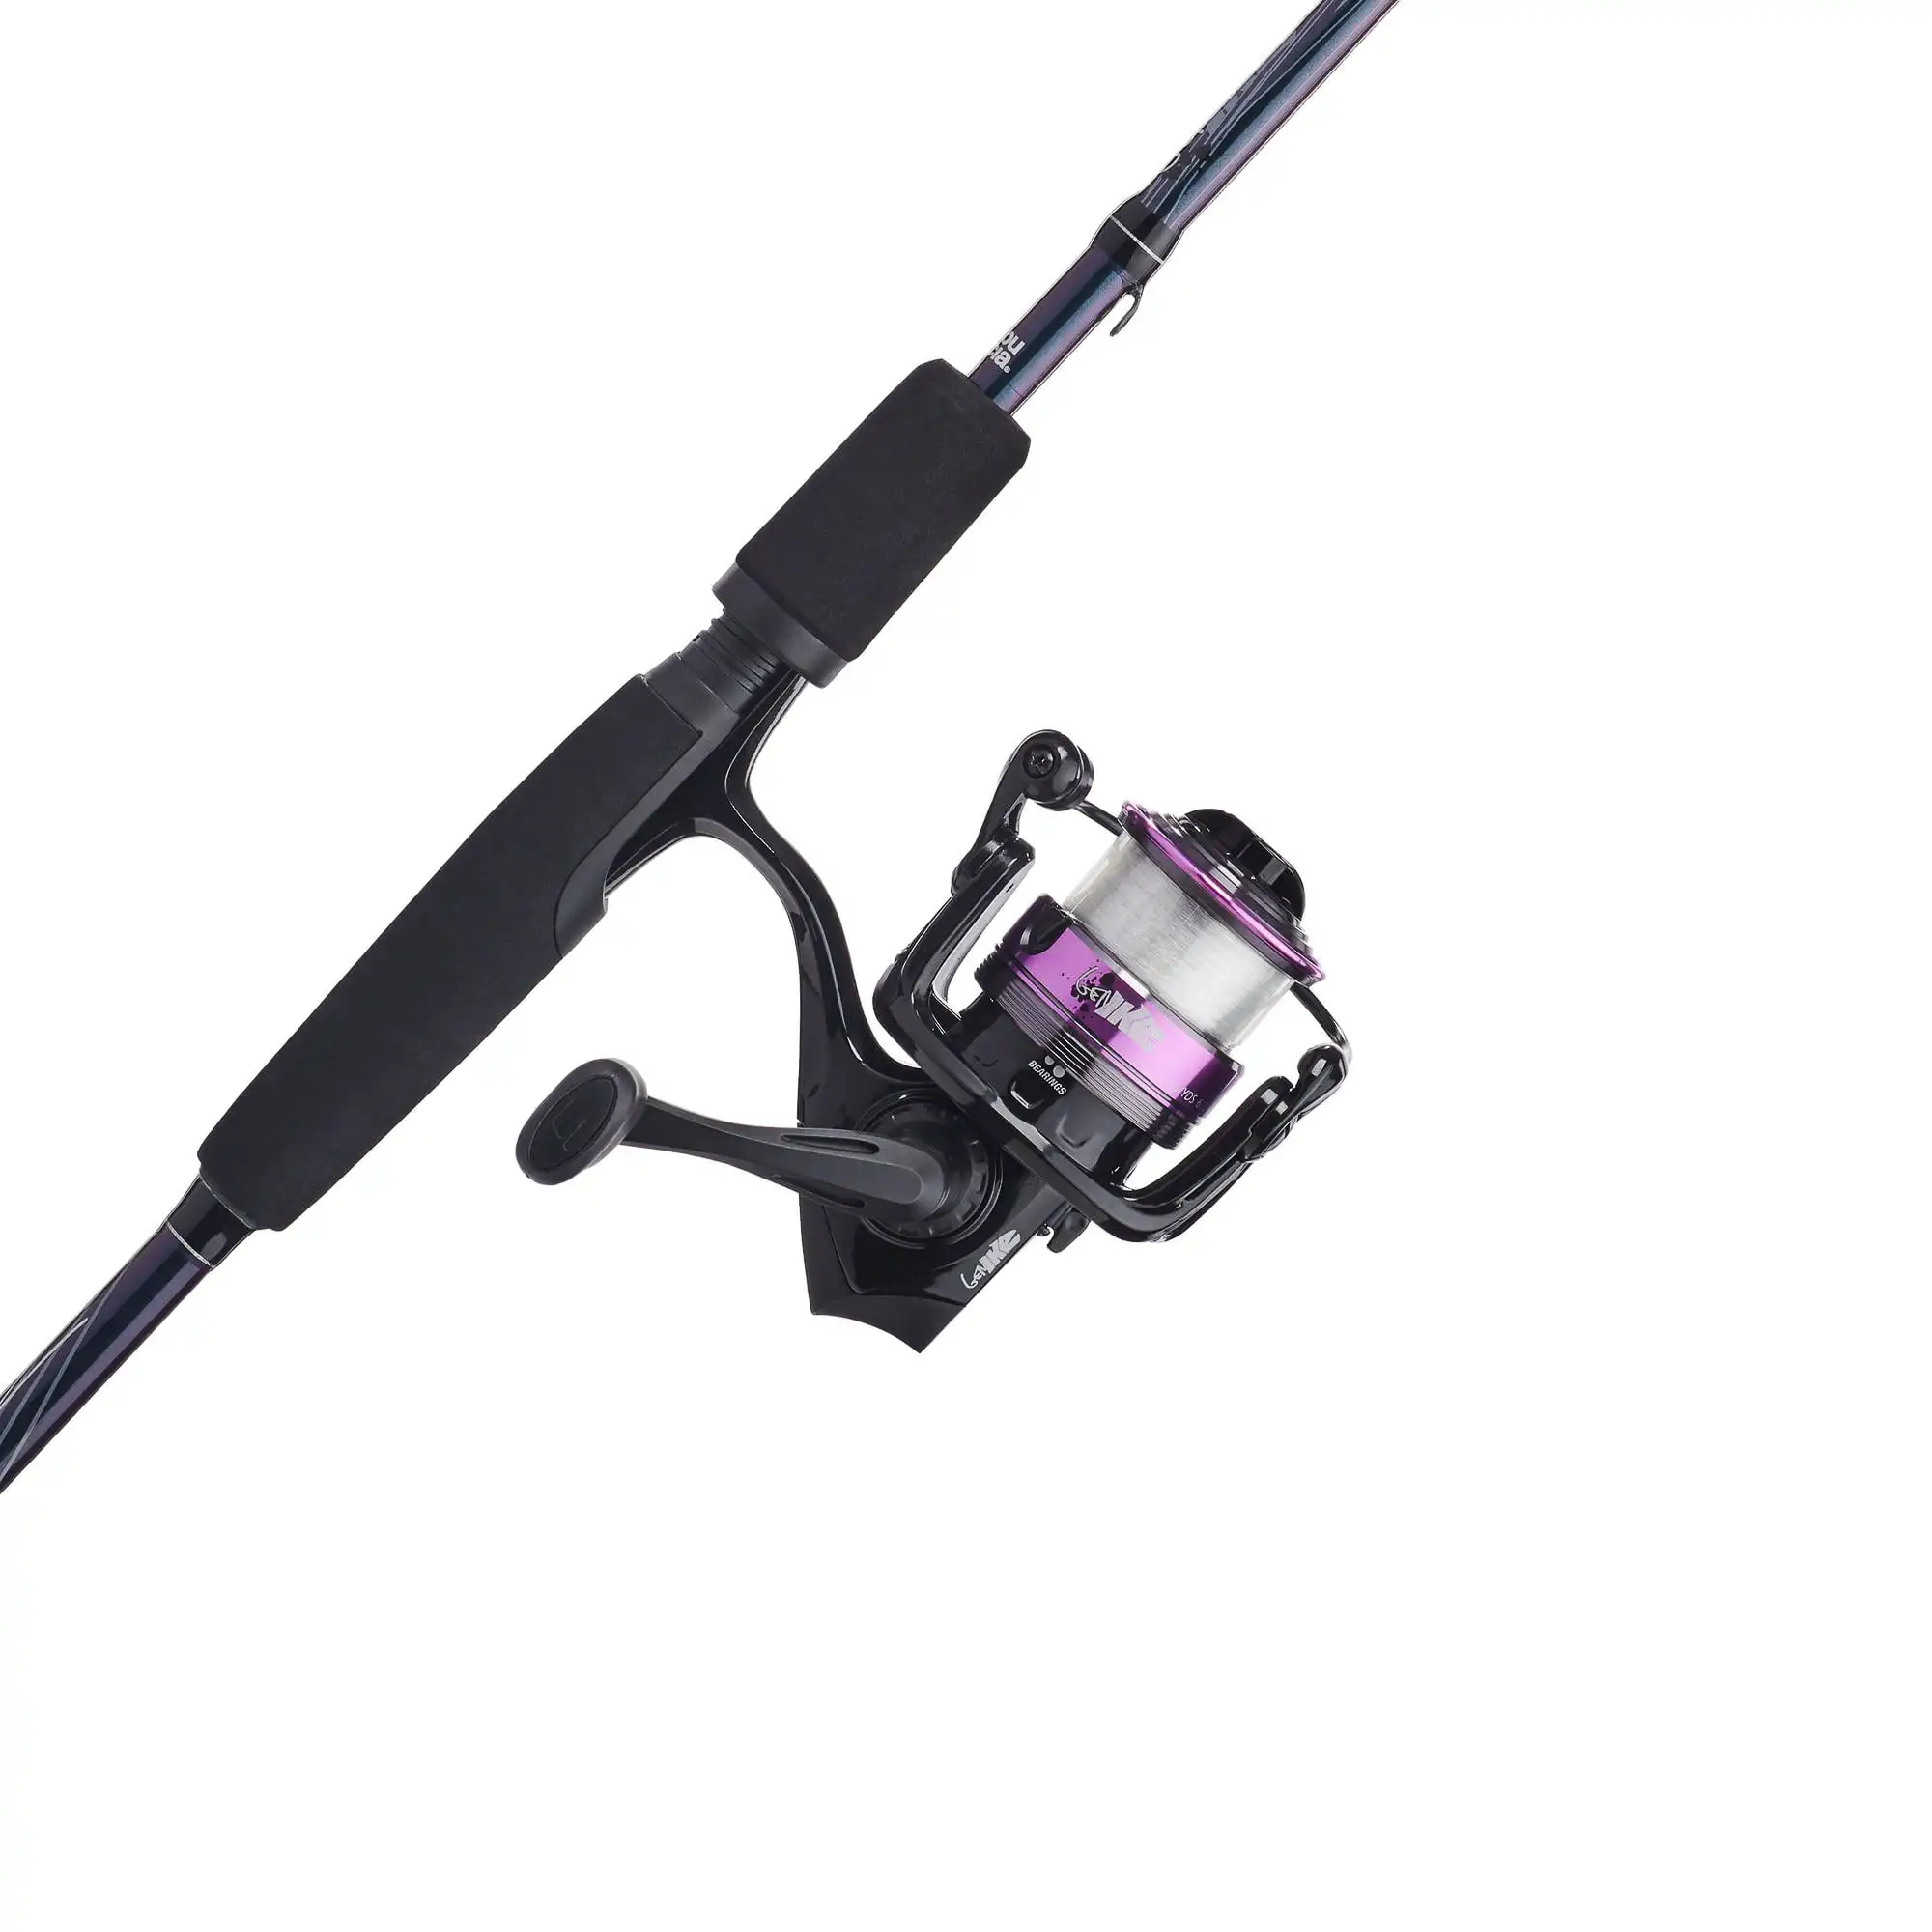 Enlarge 6’6” Gen Ike Youth Fishing Rod and Reel Spinning Combo